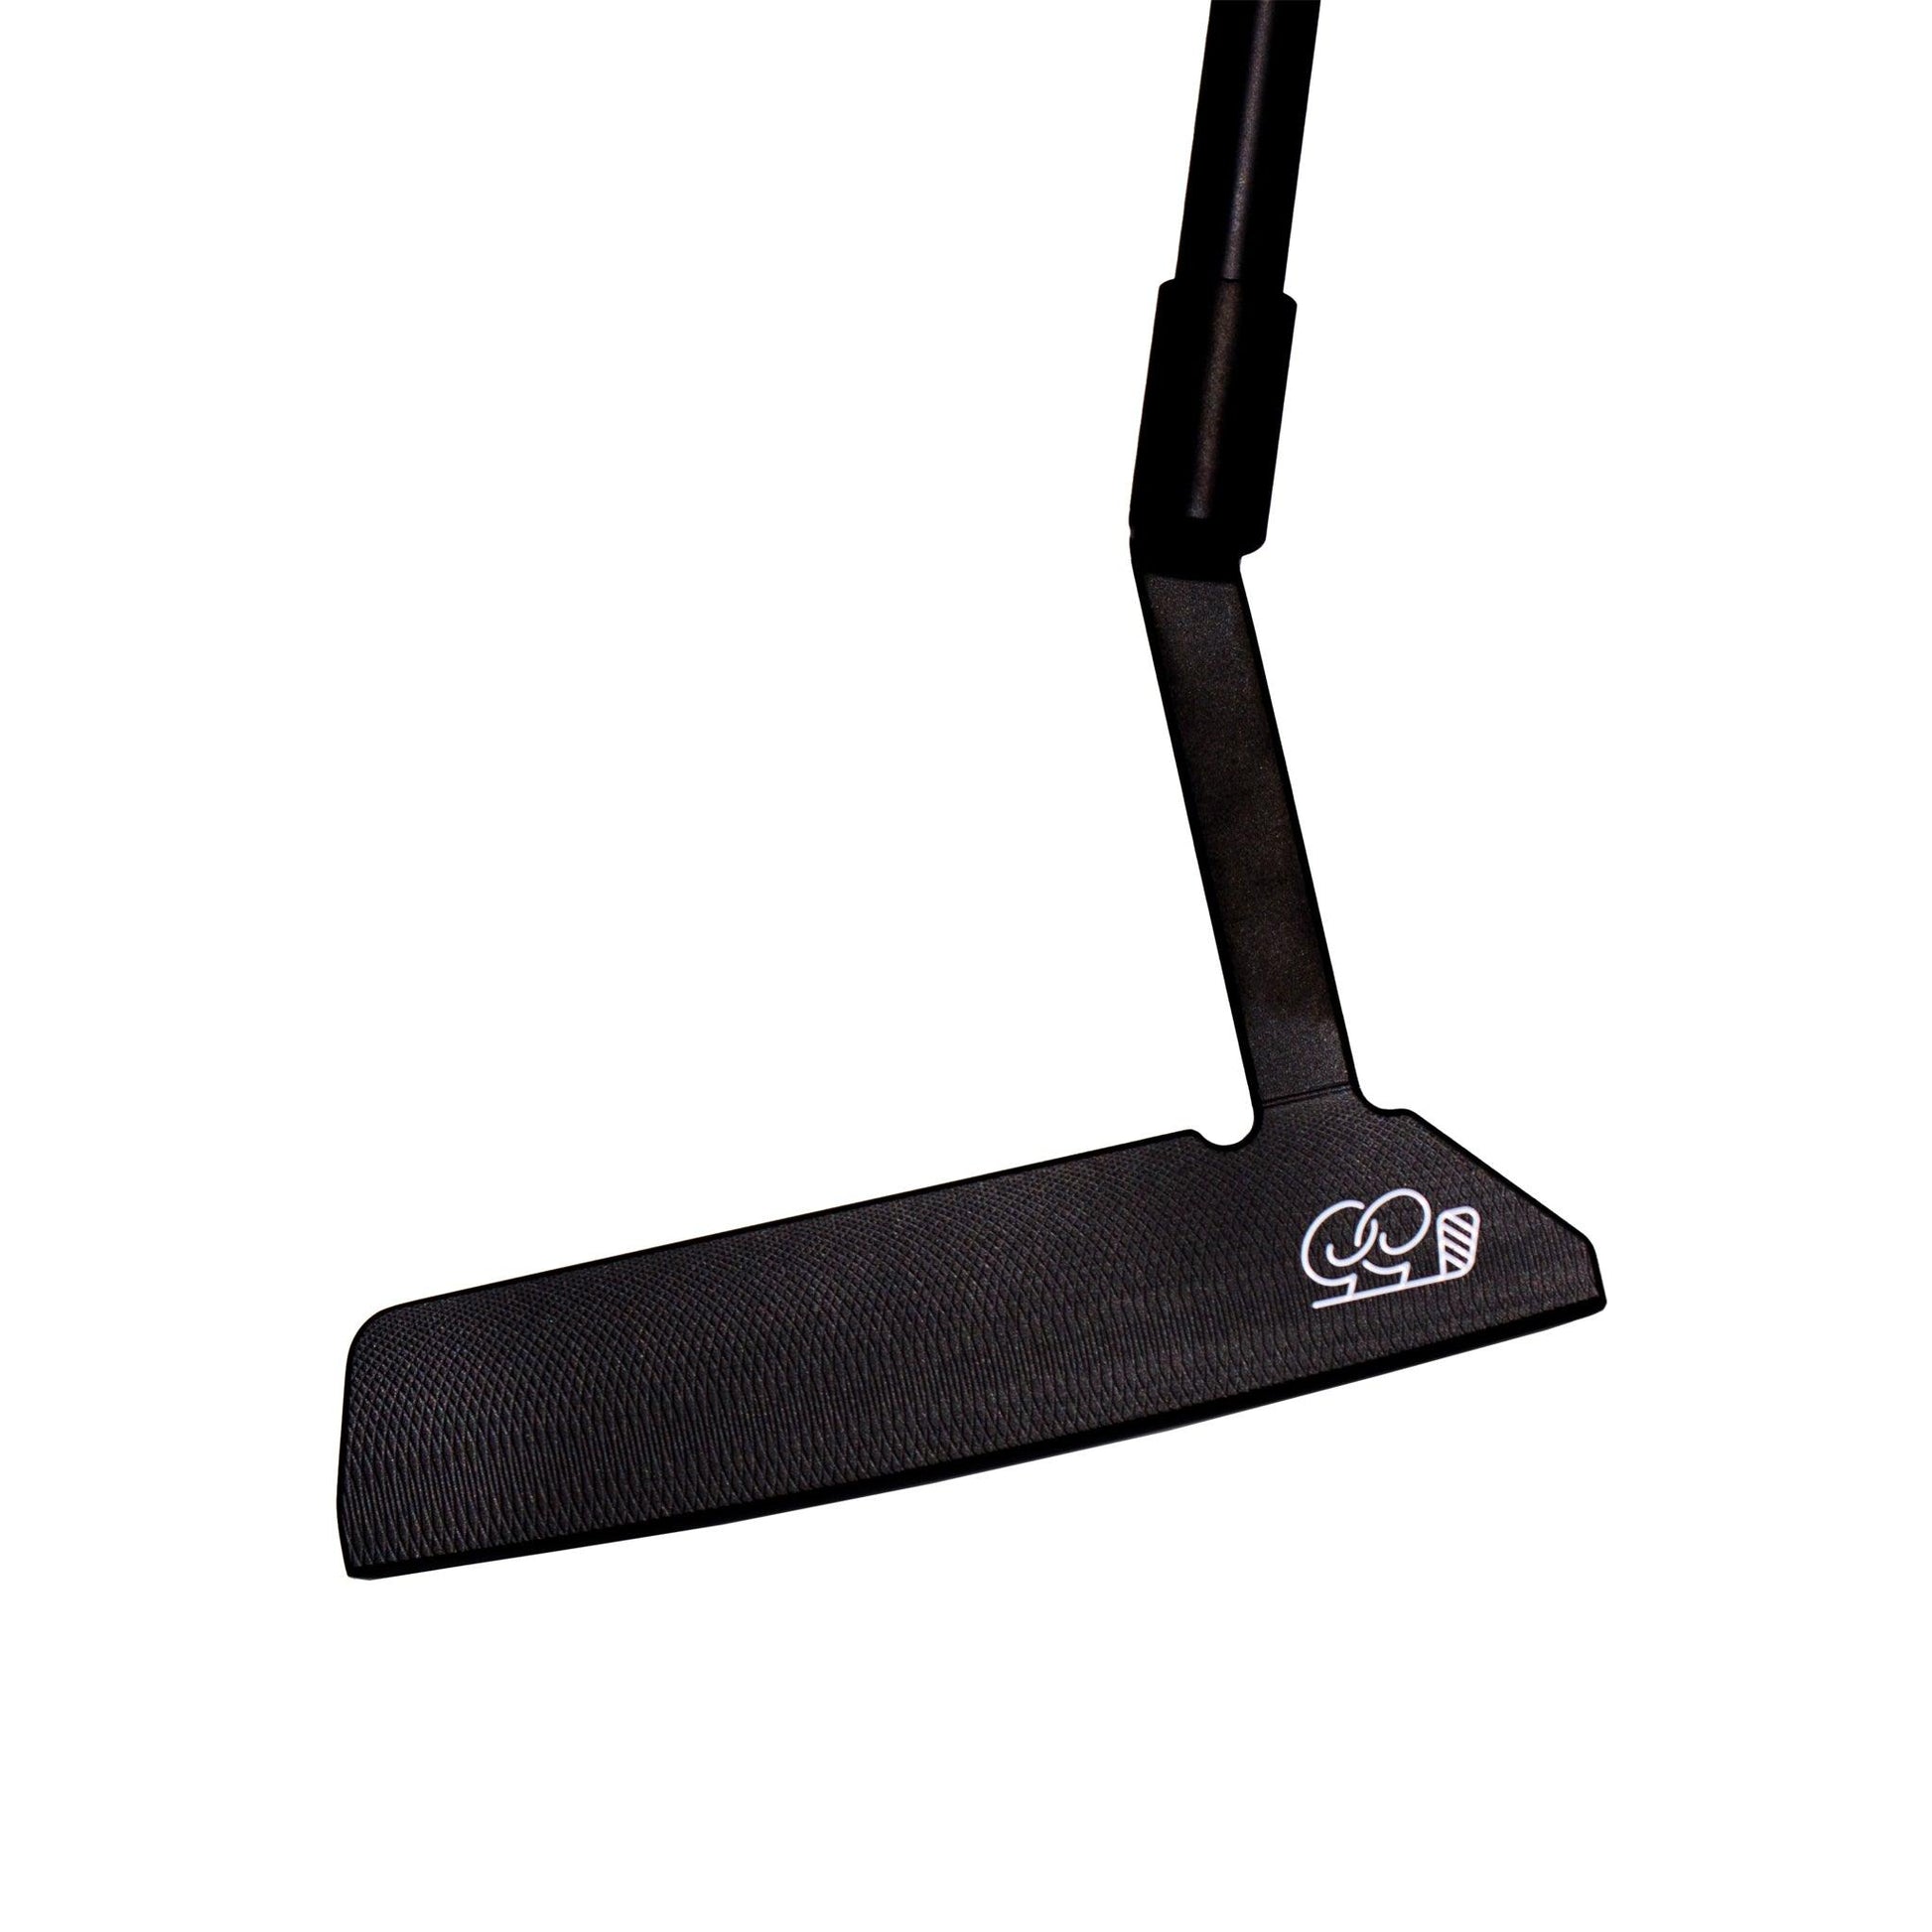 The large blade putter by good good golf